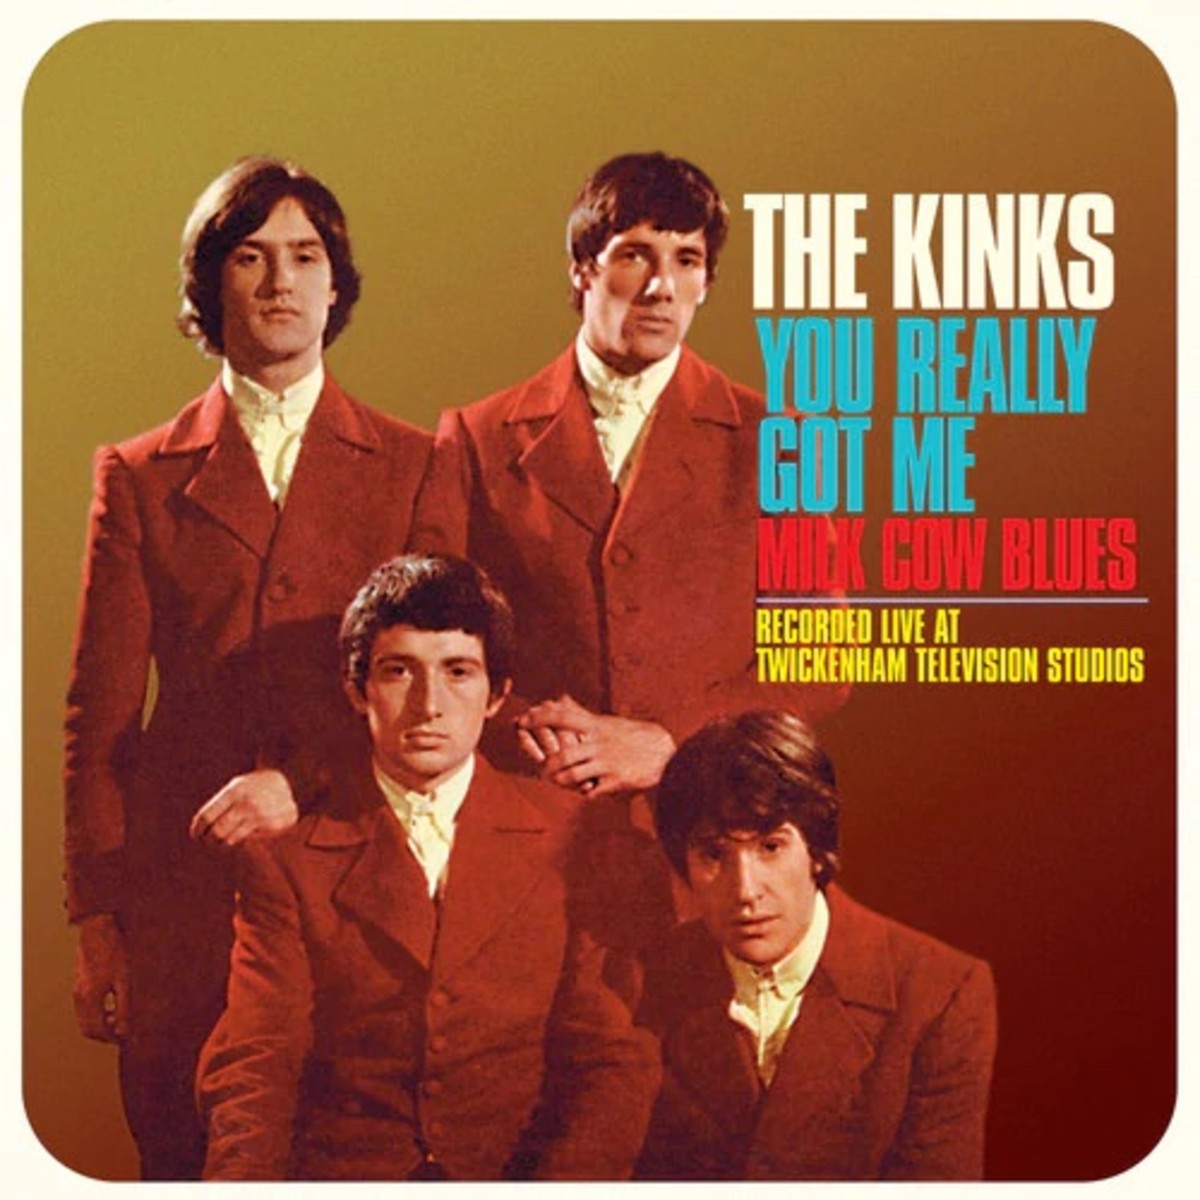 The Kinks' 7-inch never before released in the U.S., features live versions of, "You Really Got Me" and "Milk Cow Blues." Live at Twickenham Television Studios, Twickenham U.K.